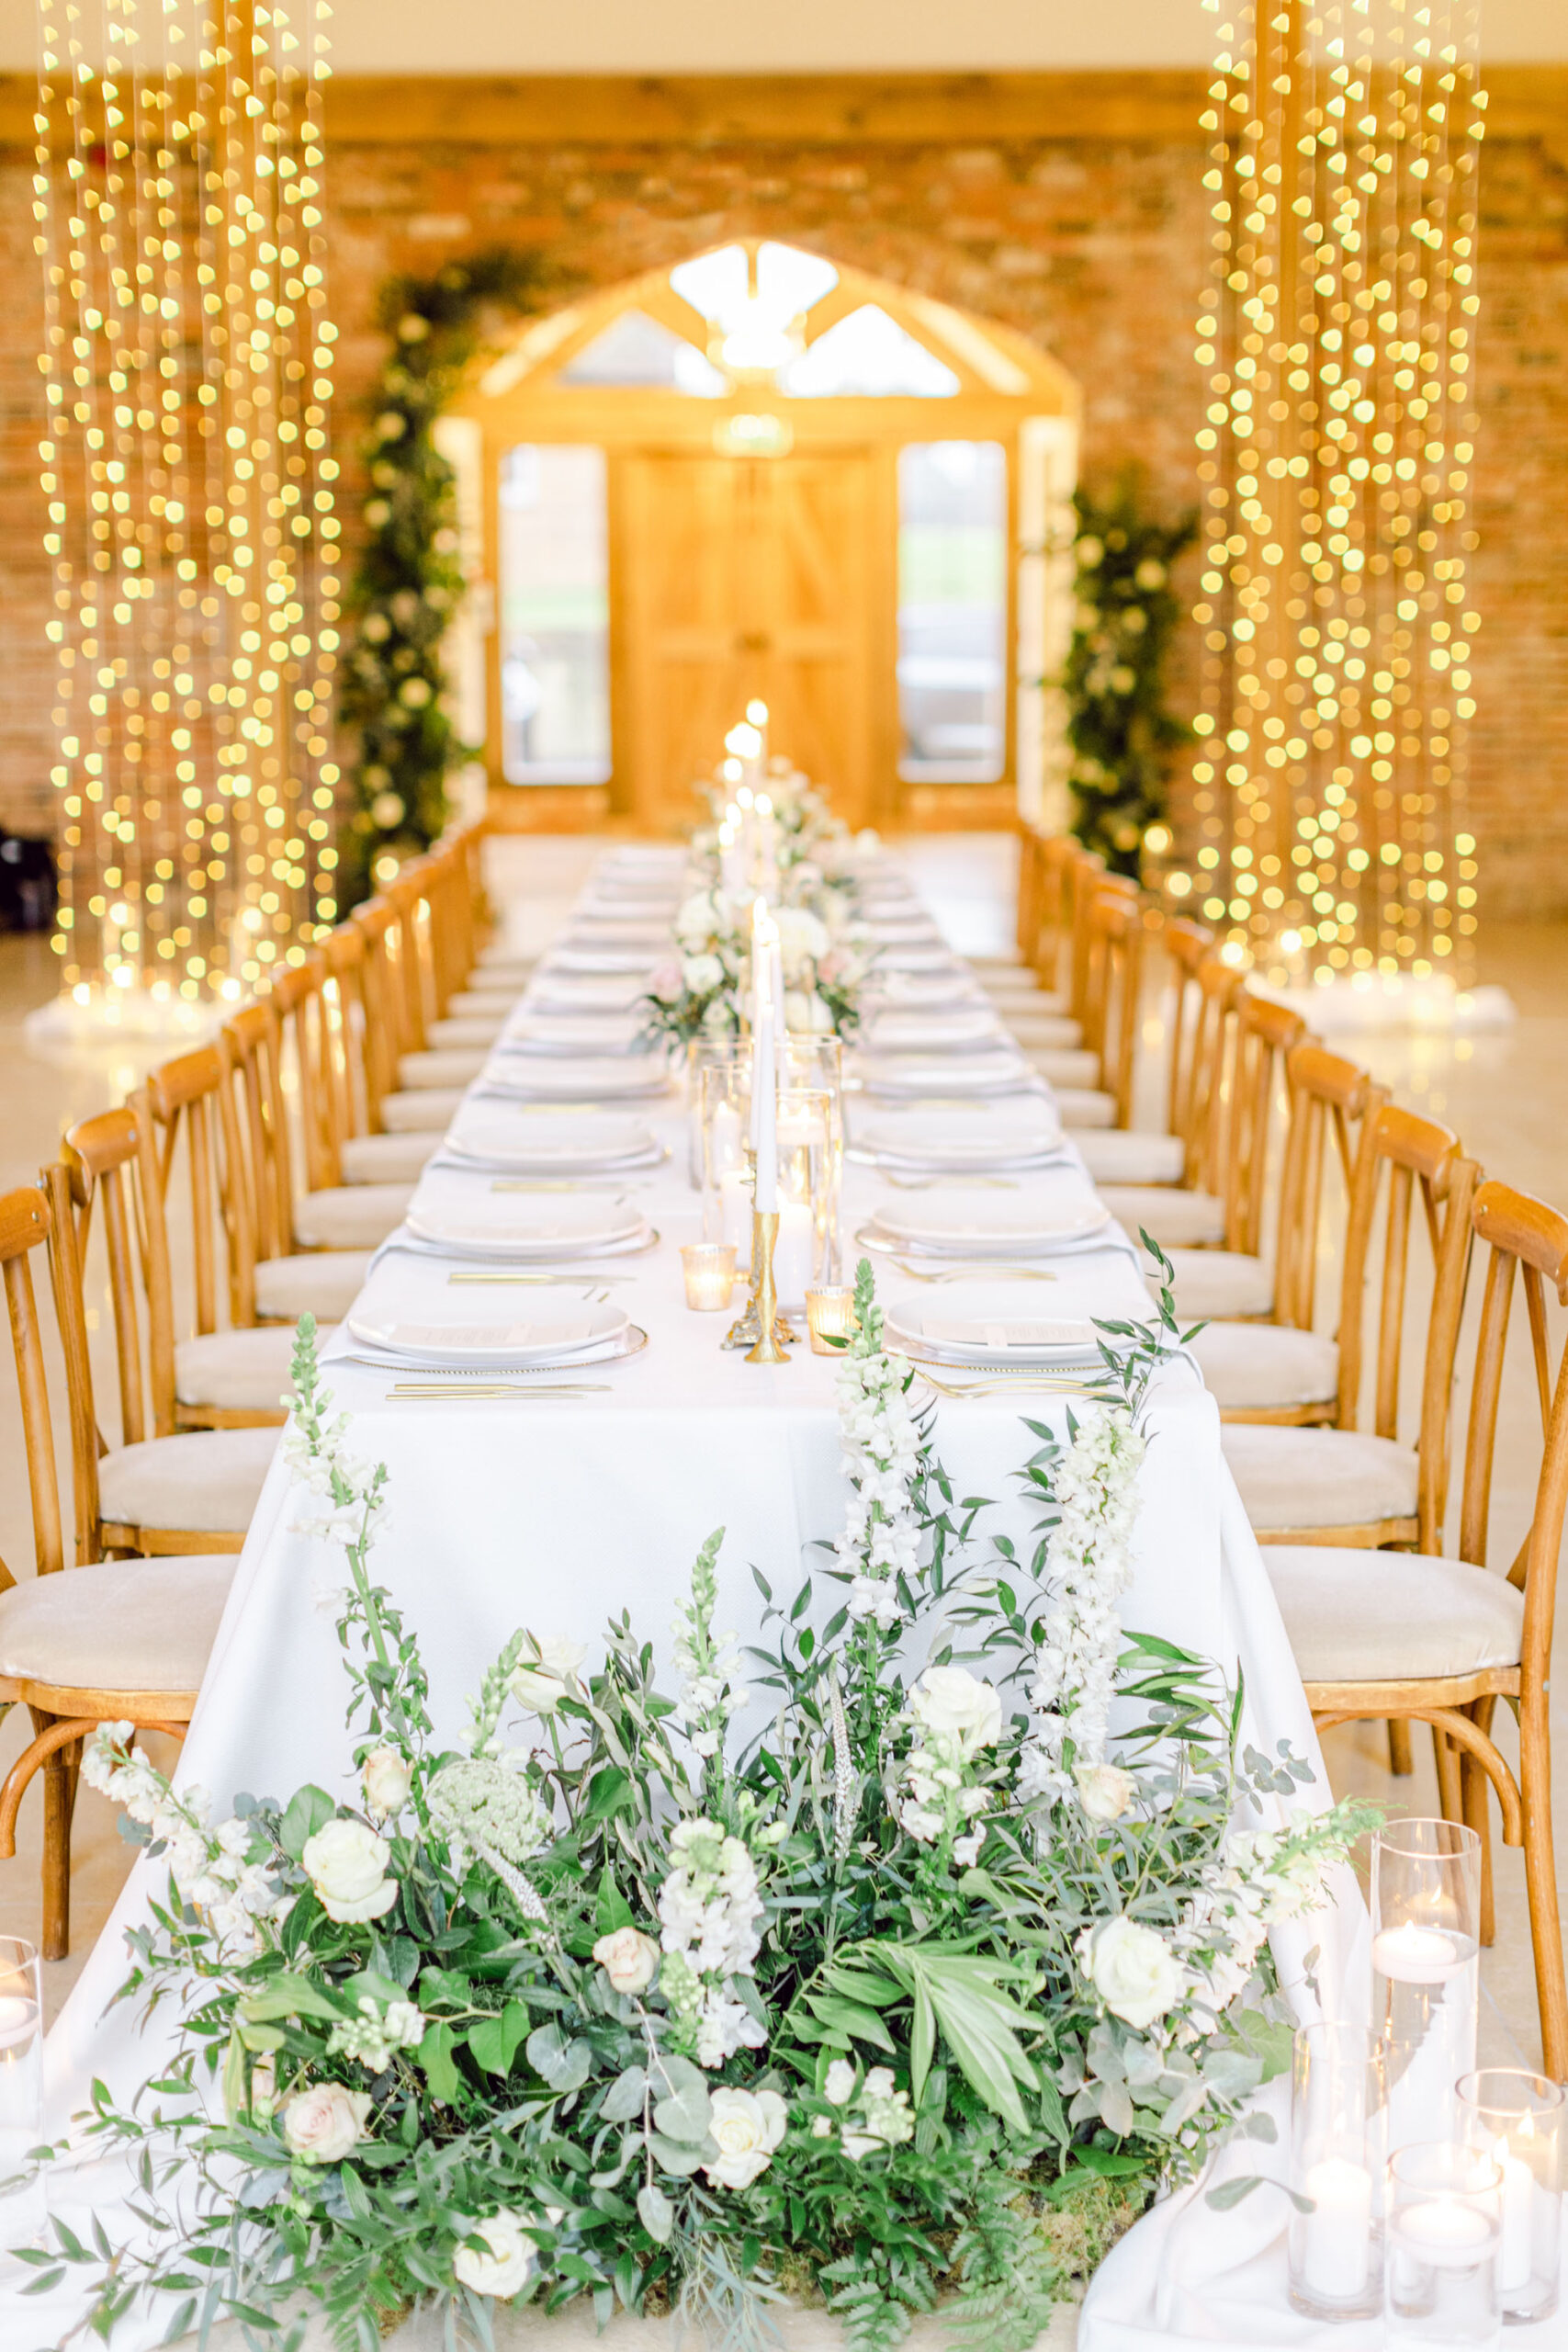 Long banquet style luxury wedding table with lots of greenery and candles down the centre line. The table is highlighted by fairy light candies in the background. Image by Natalie D Photography